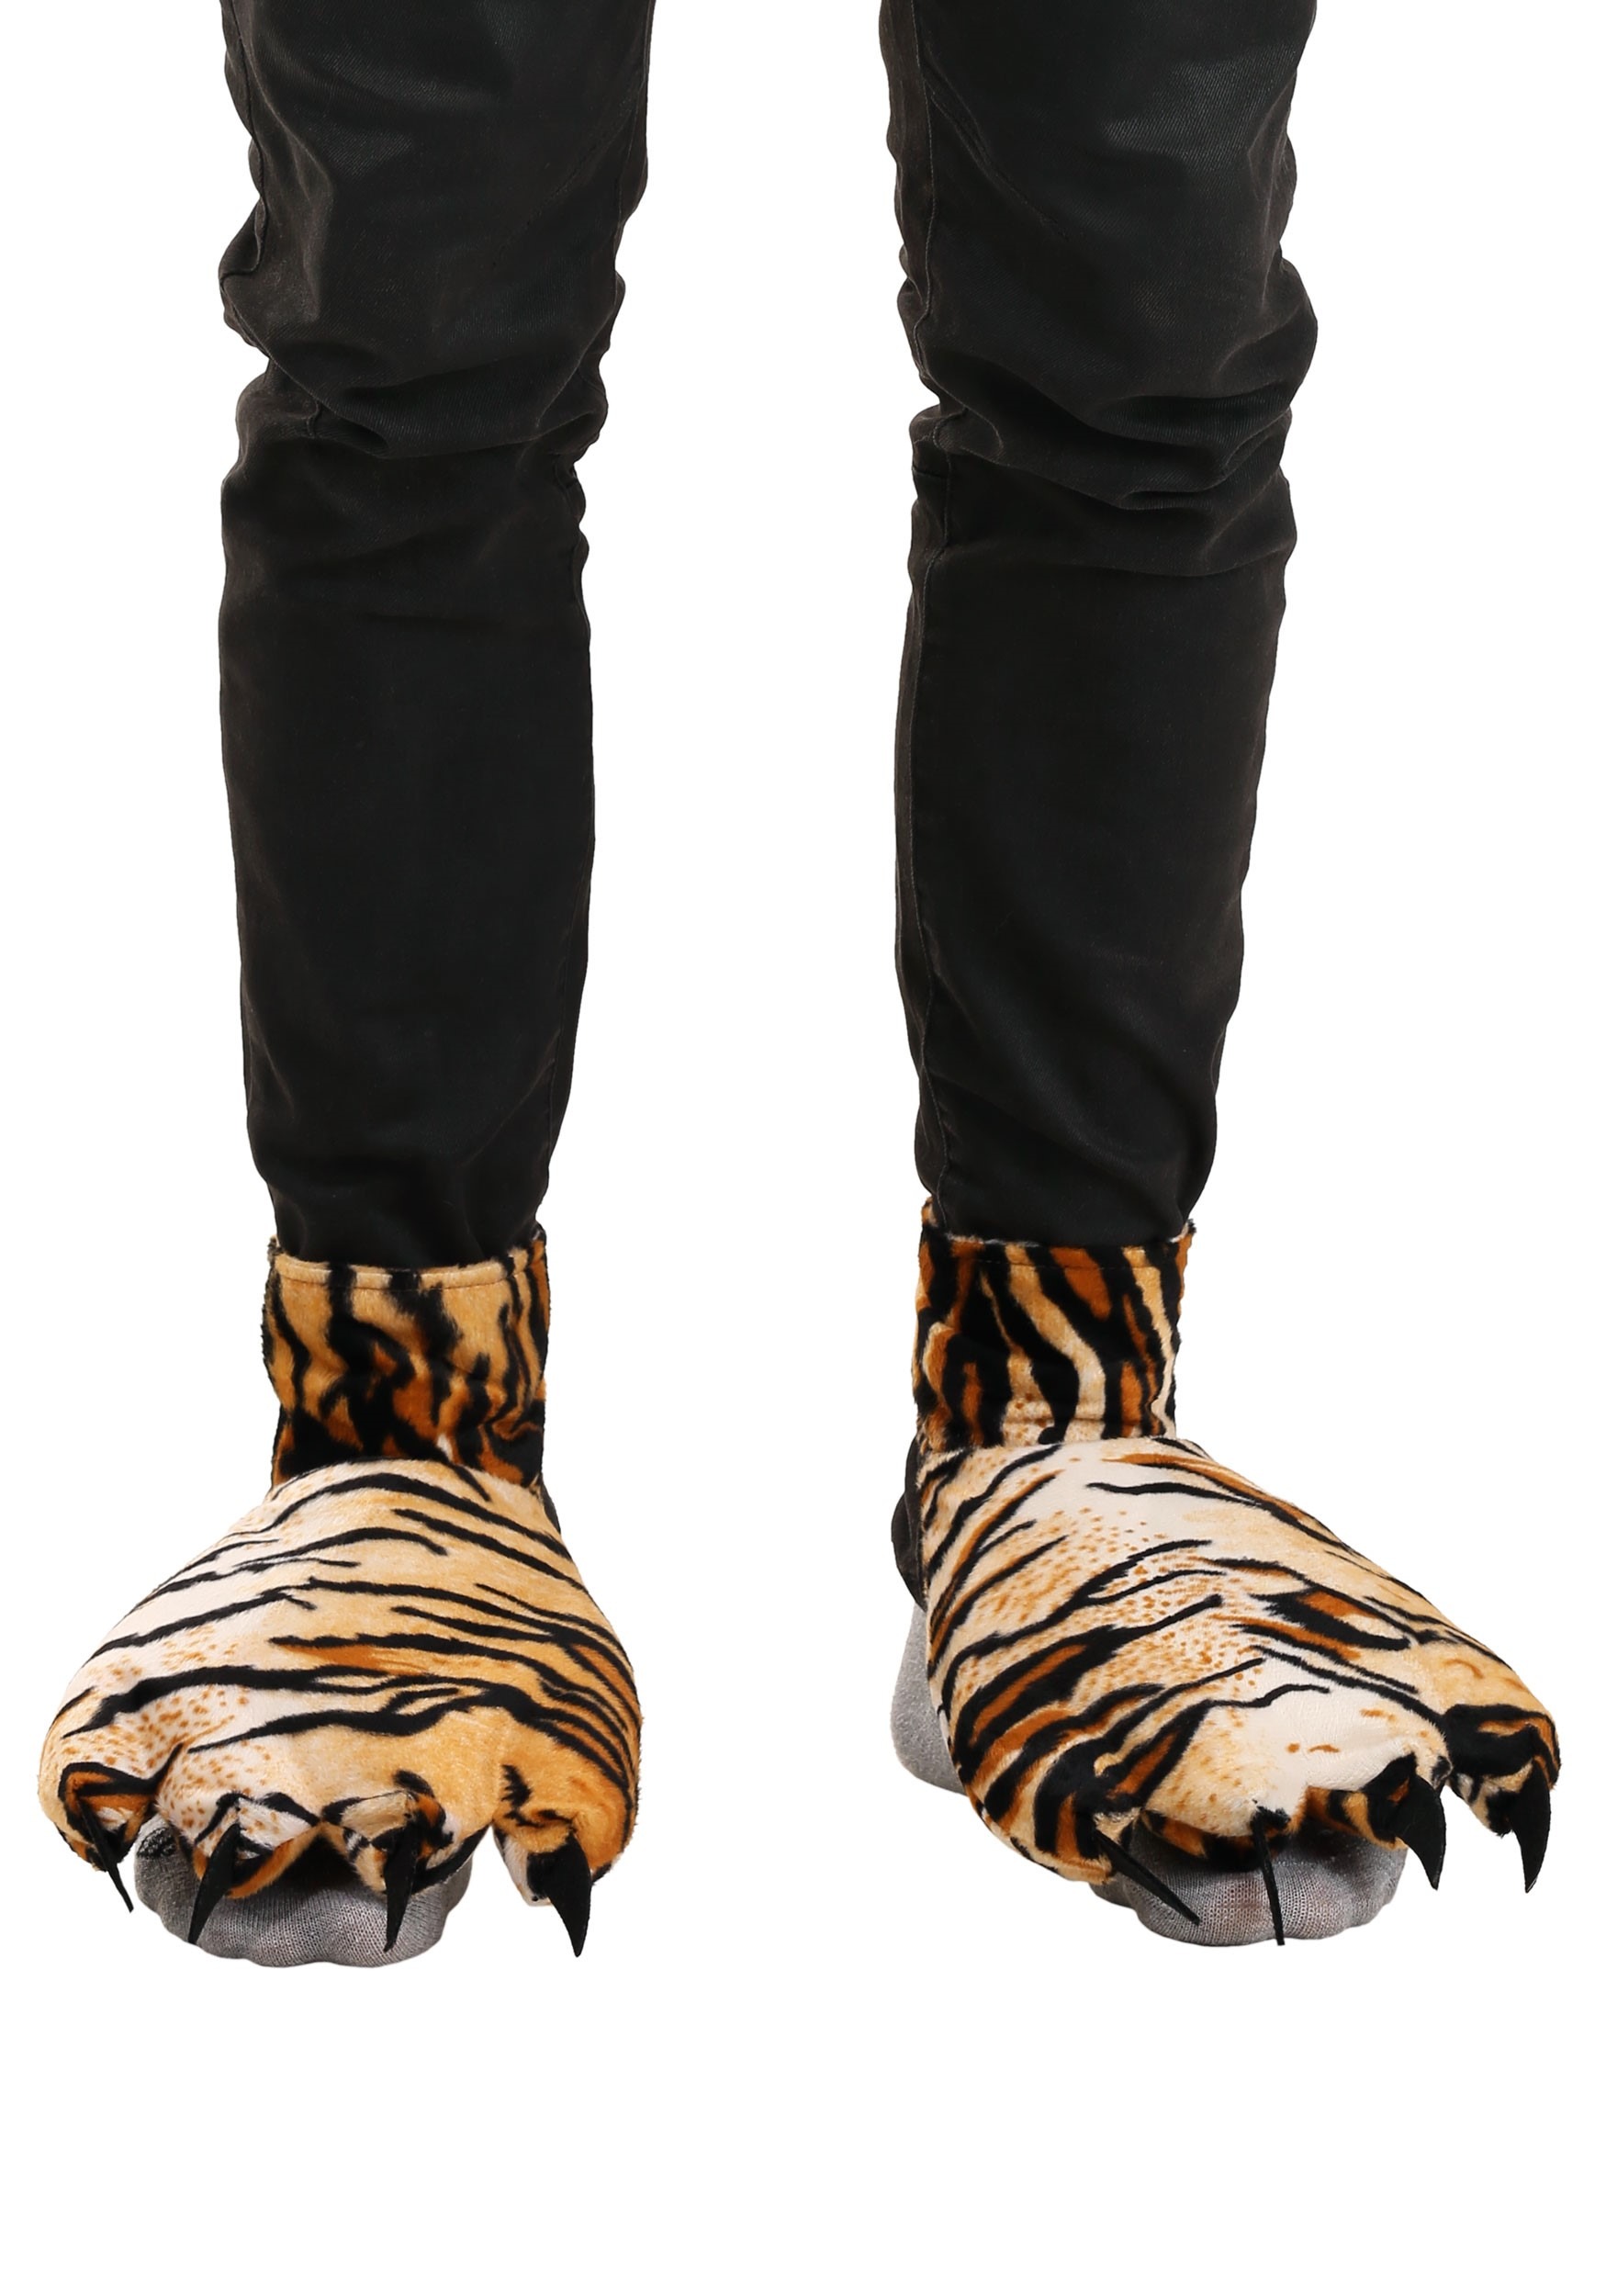 Tiger Shoe Covers Accessories